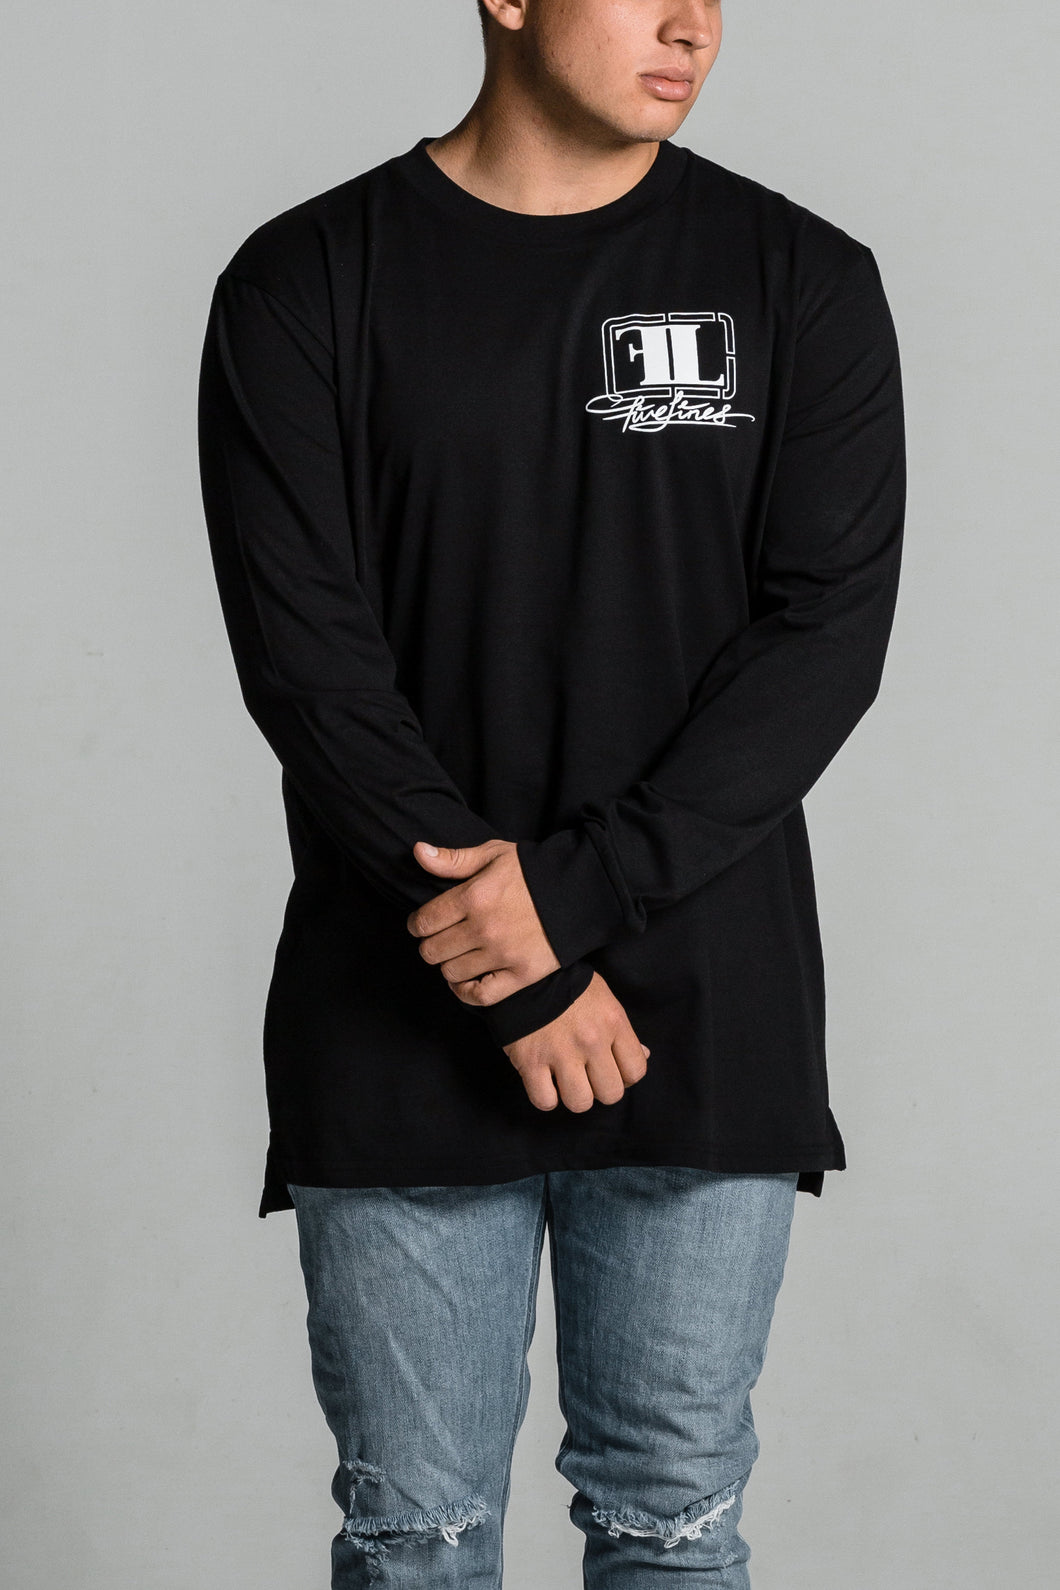 'Insight' Long Sleeve T-Shirt - Black (Relaxed Fit)